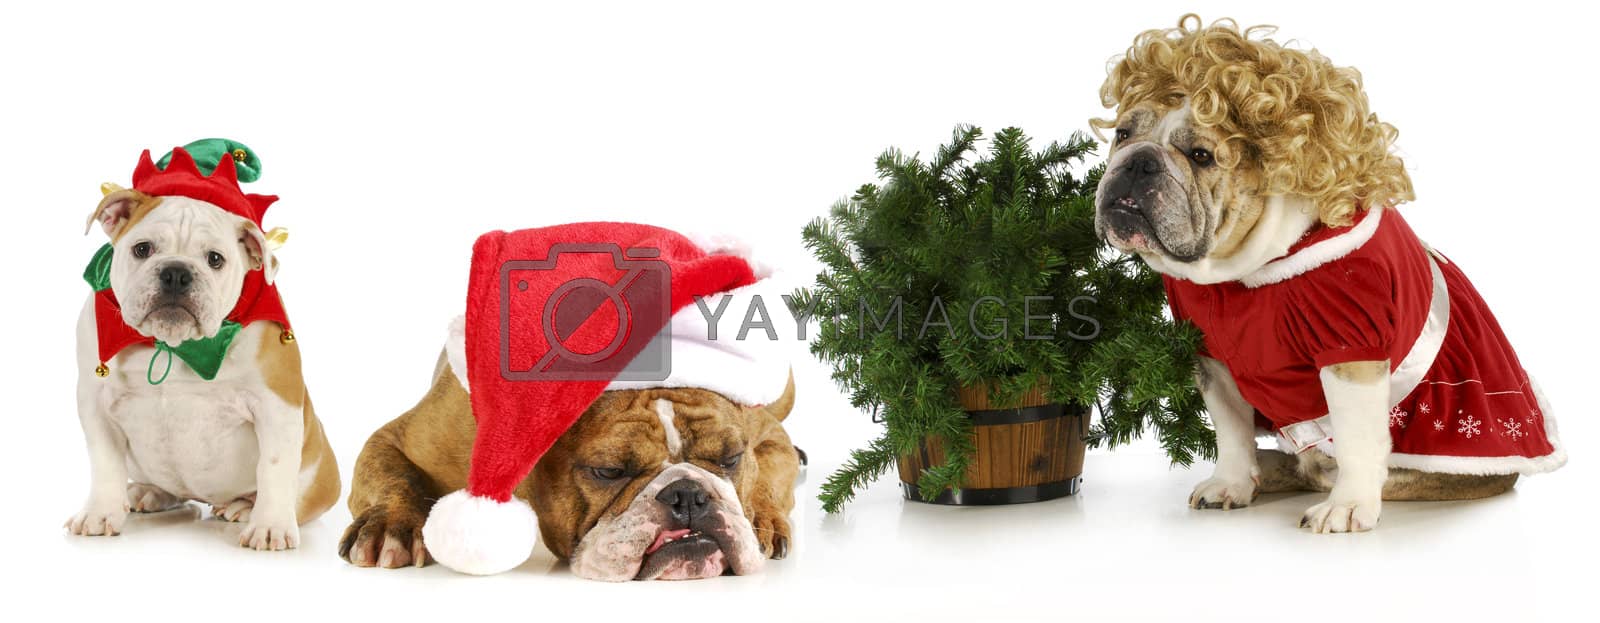 Royalty free image of christmas dogs by willeecole123